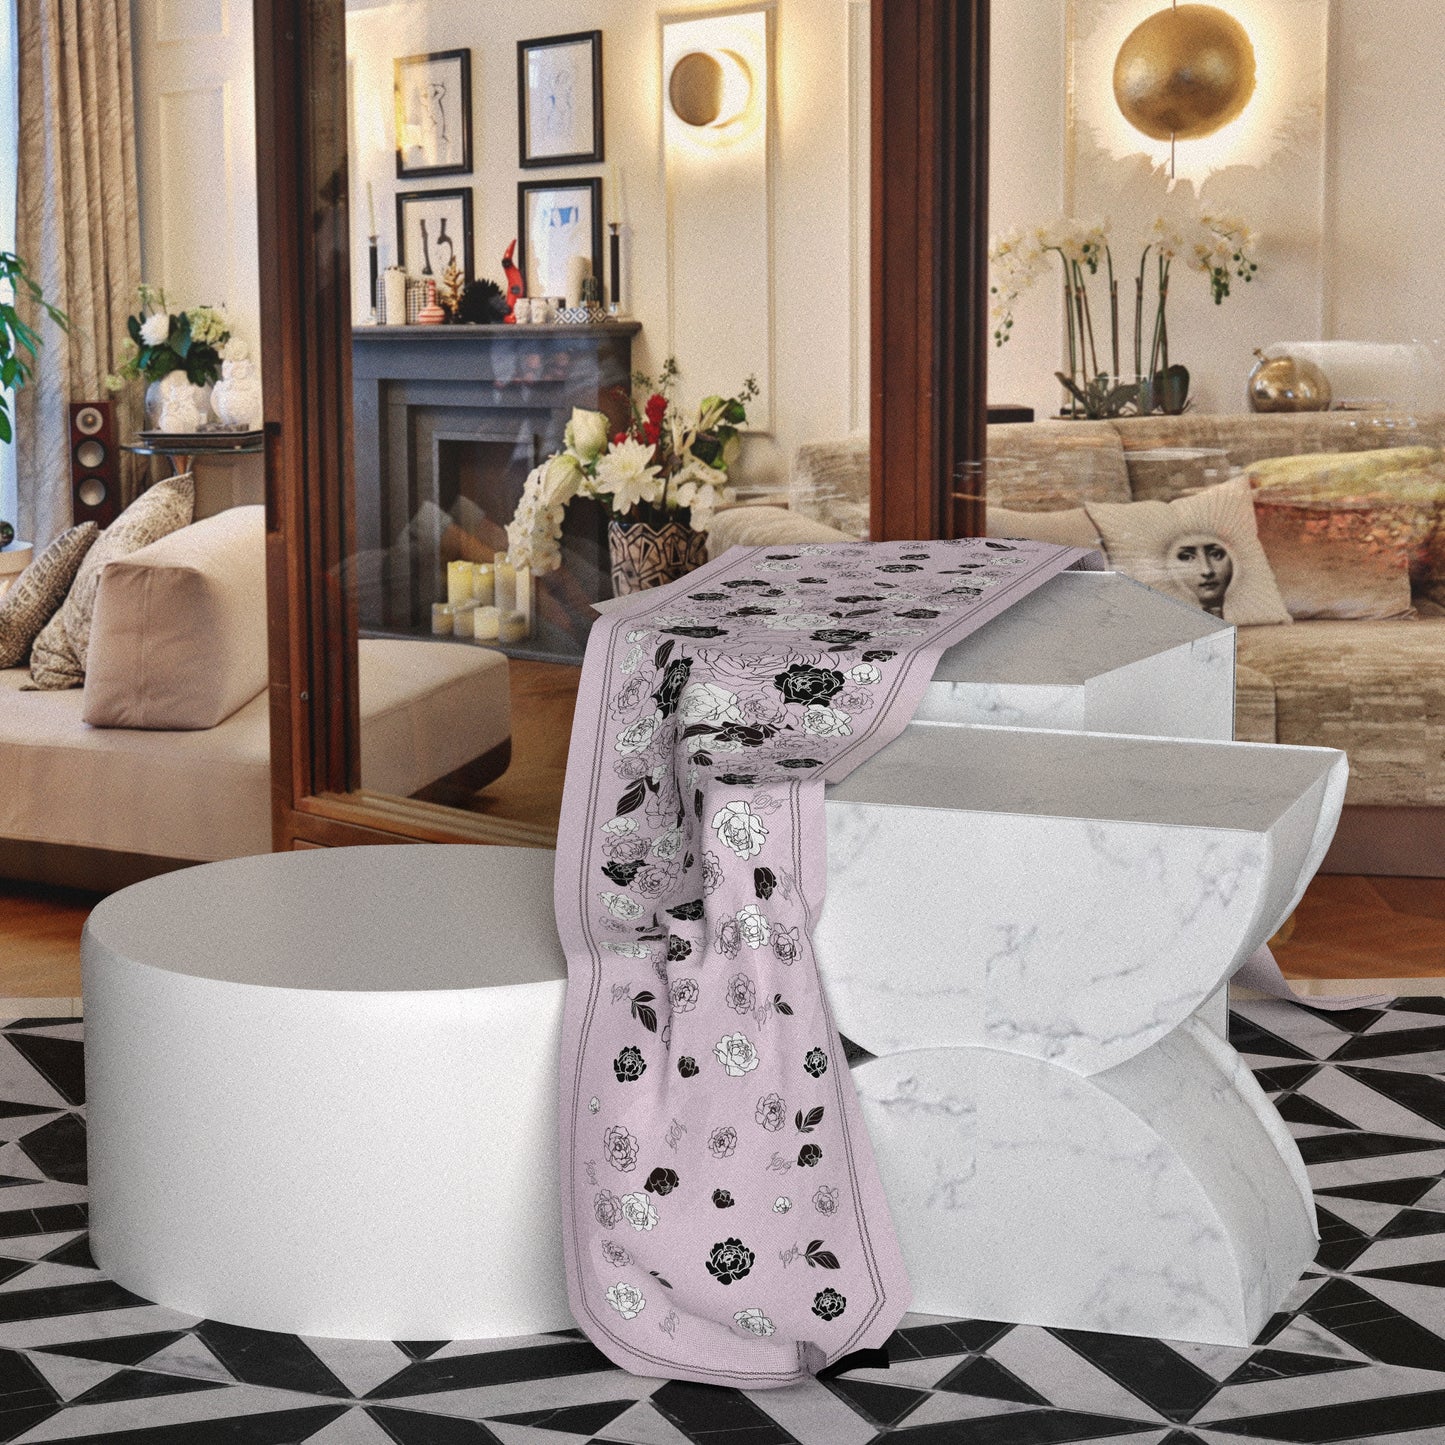 "Classy and Fabulous" Waterproof Table Runner